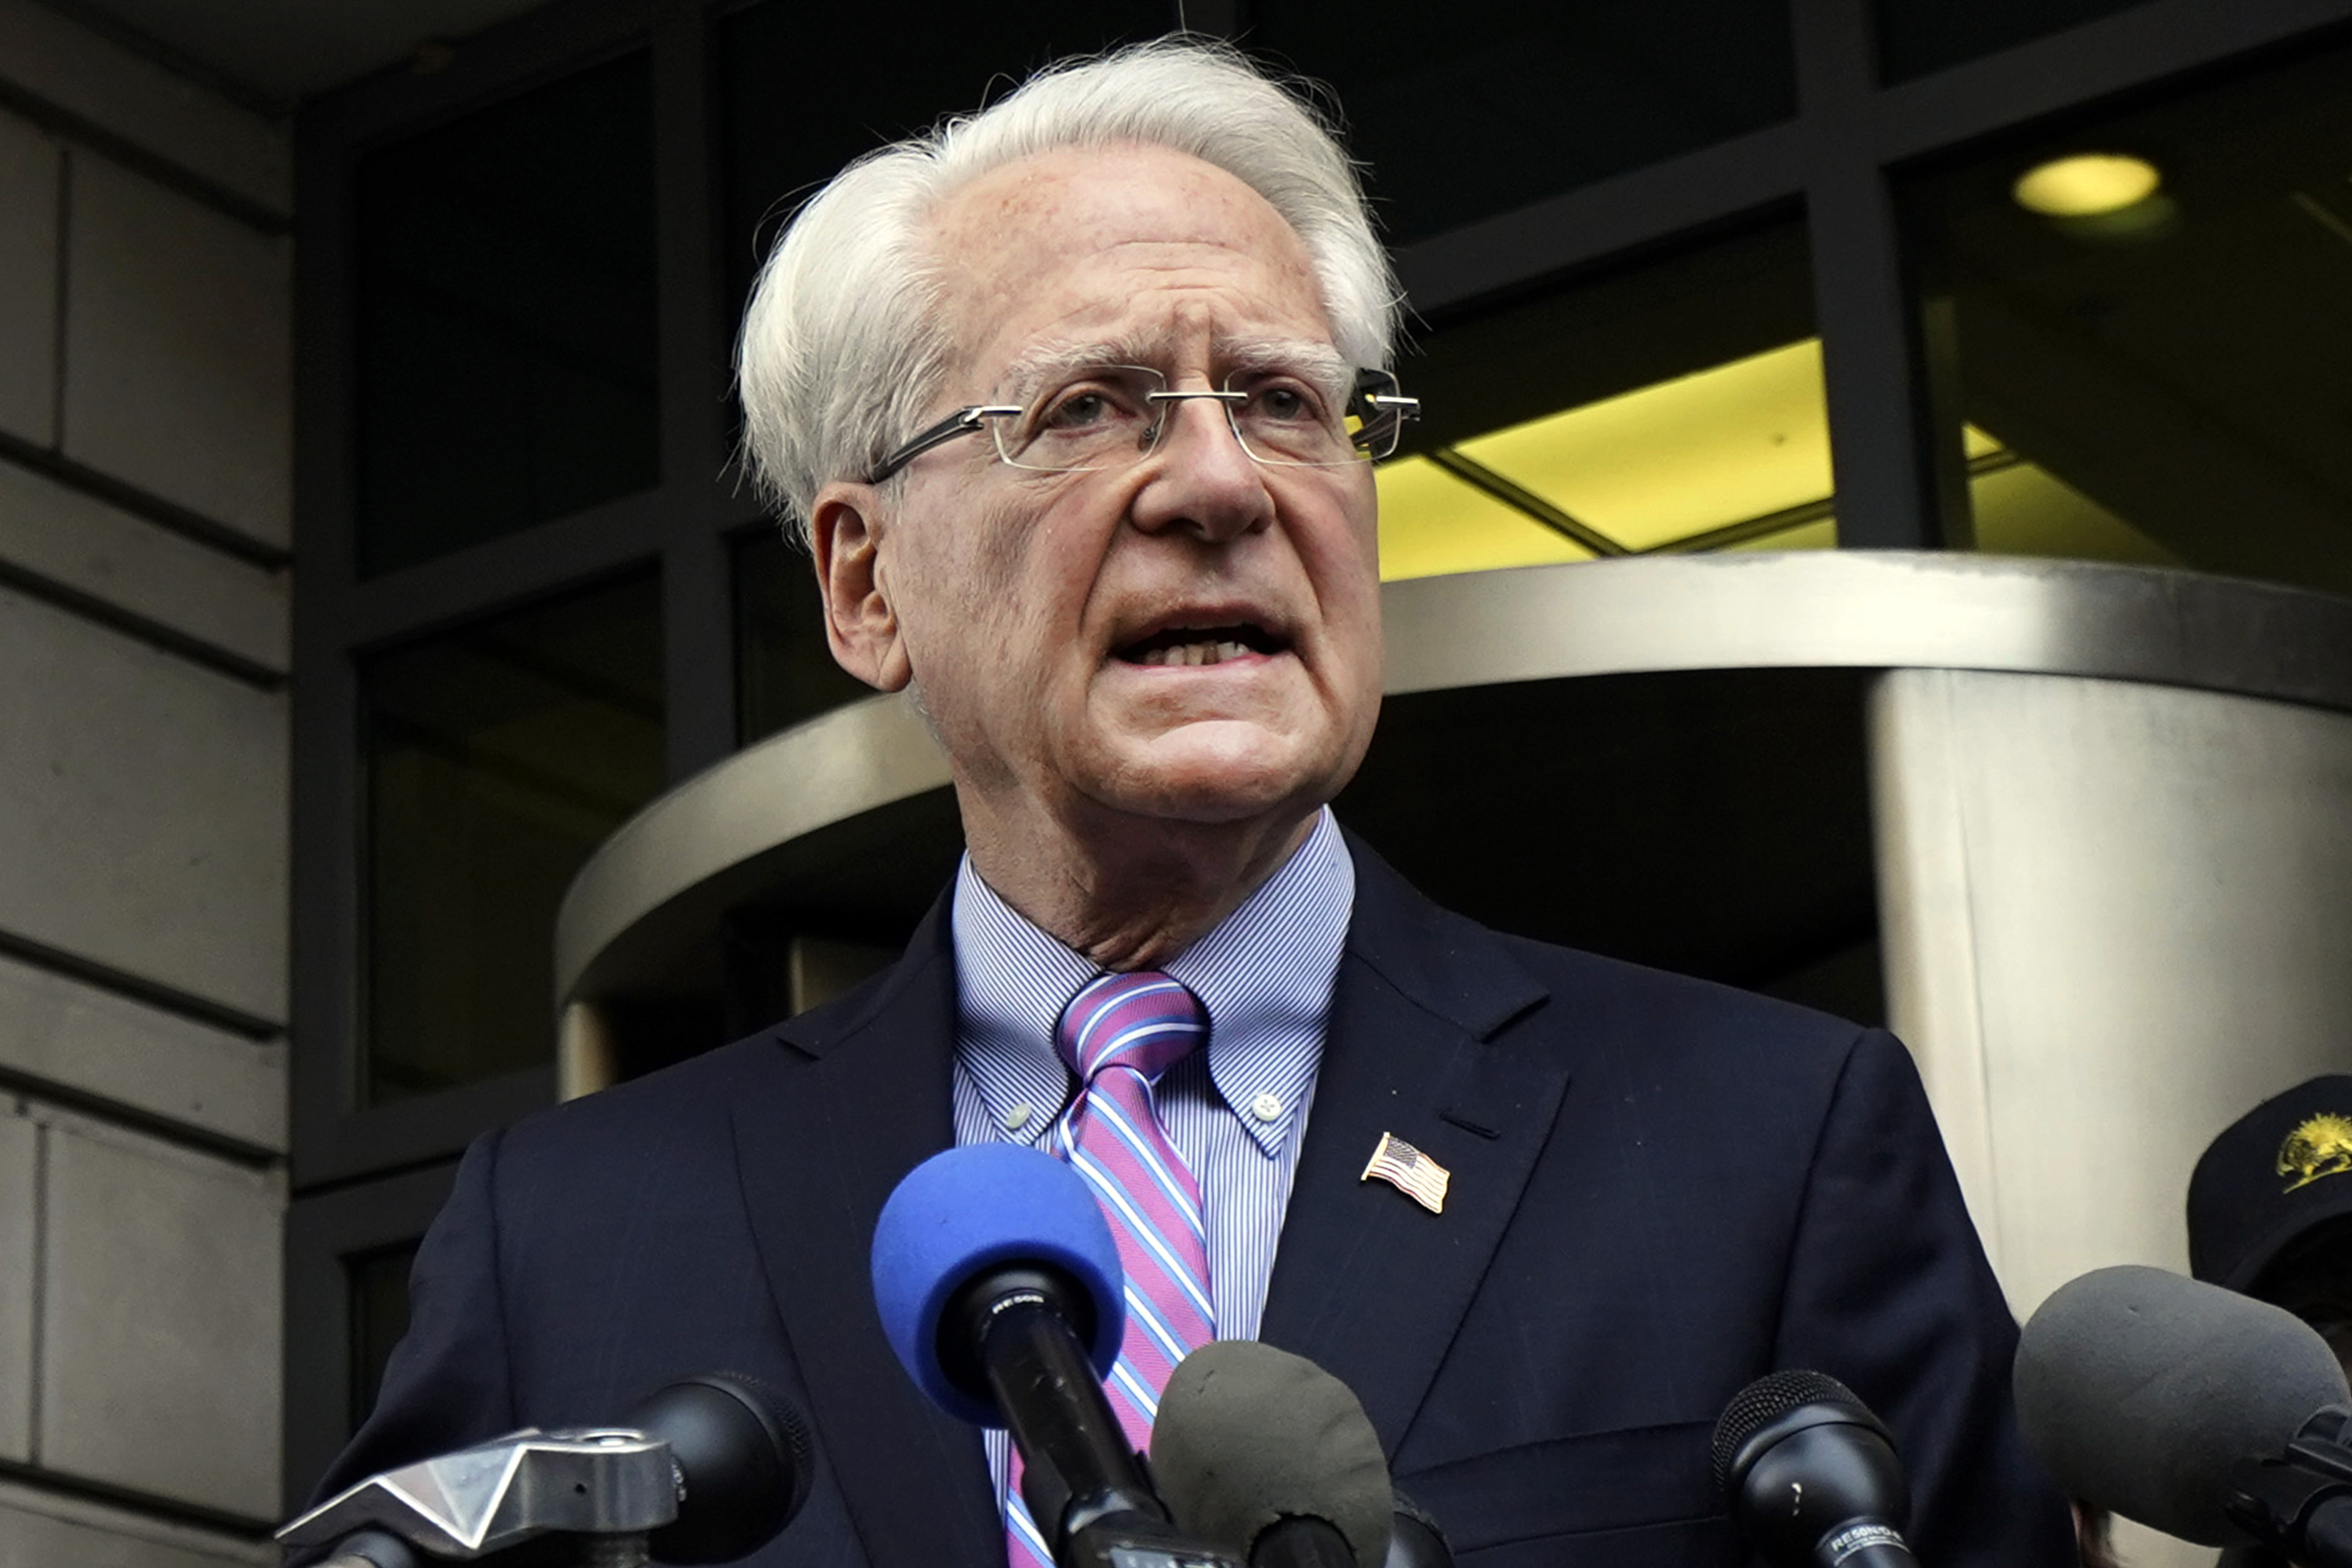 FILE - Lawyer Larry Klayman speaks during a news conference outside the federal courthouse in Washington, Jan. 3, 2019. Klayman, Roy Moore's attorney, tried to convince three federal appeals court judges to revive a $95 million lawsuit the former Alabama candidate for U.S. Senate brought against comedian Sacha Baron Cohen, in New York, Friday, June 10, 2022. (AP Photo/Sait Serkan Gurbuz, File)